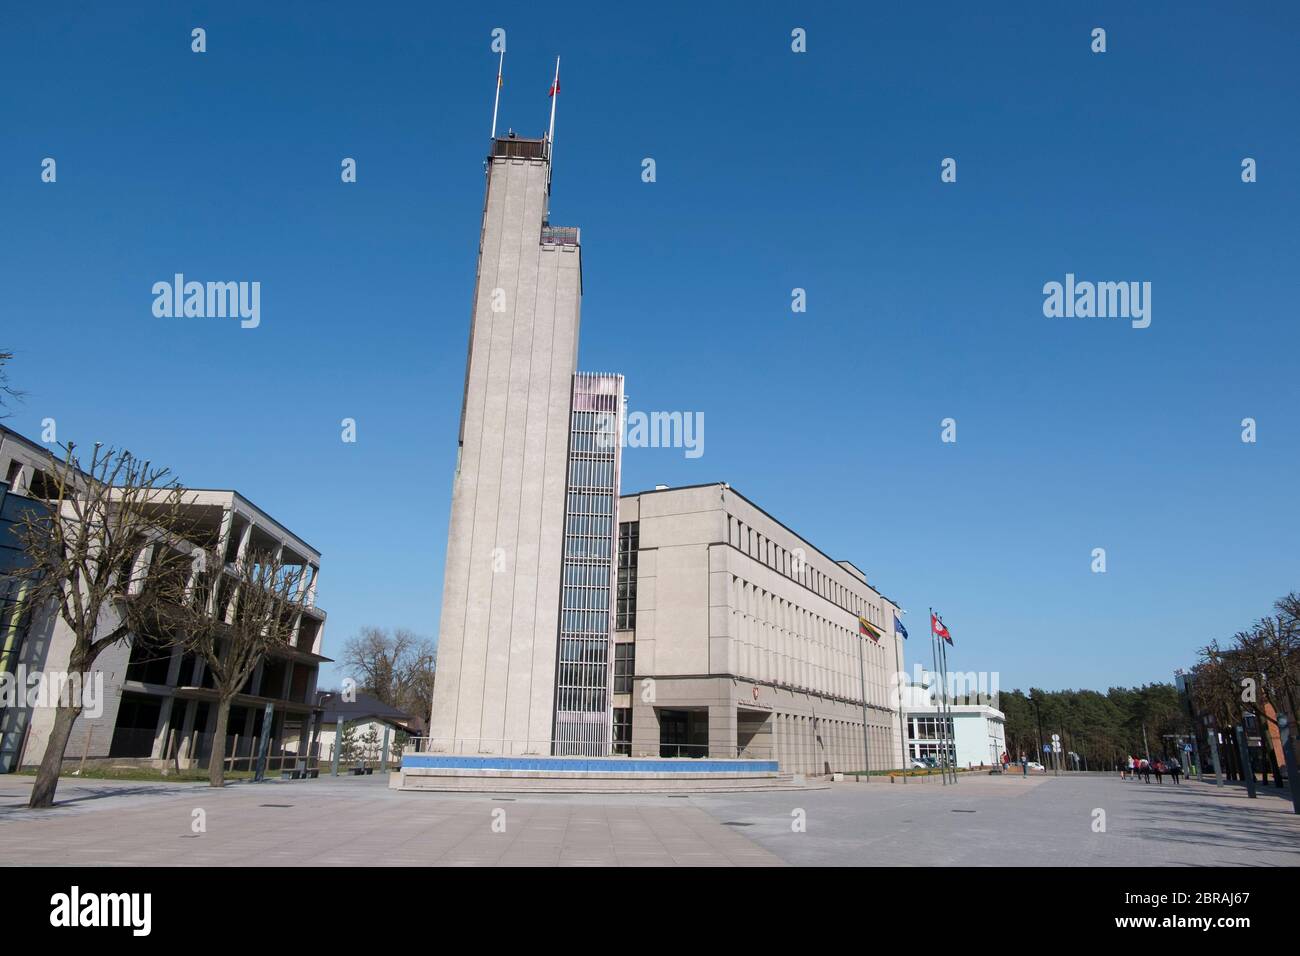 The impressive Brutalist, Communist style architecture of the Soviet era City Hall. In Alytus, Lithuania. Stock Photo